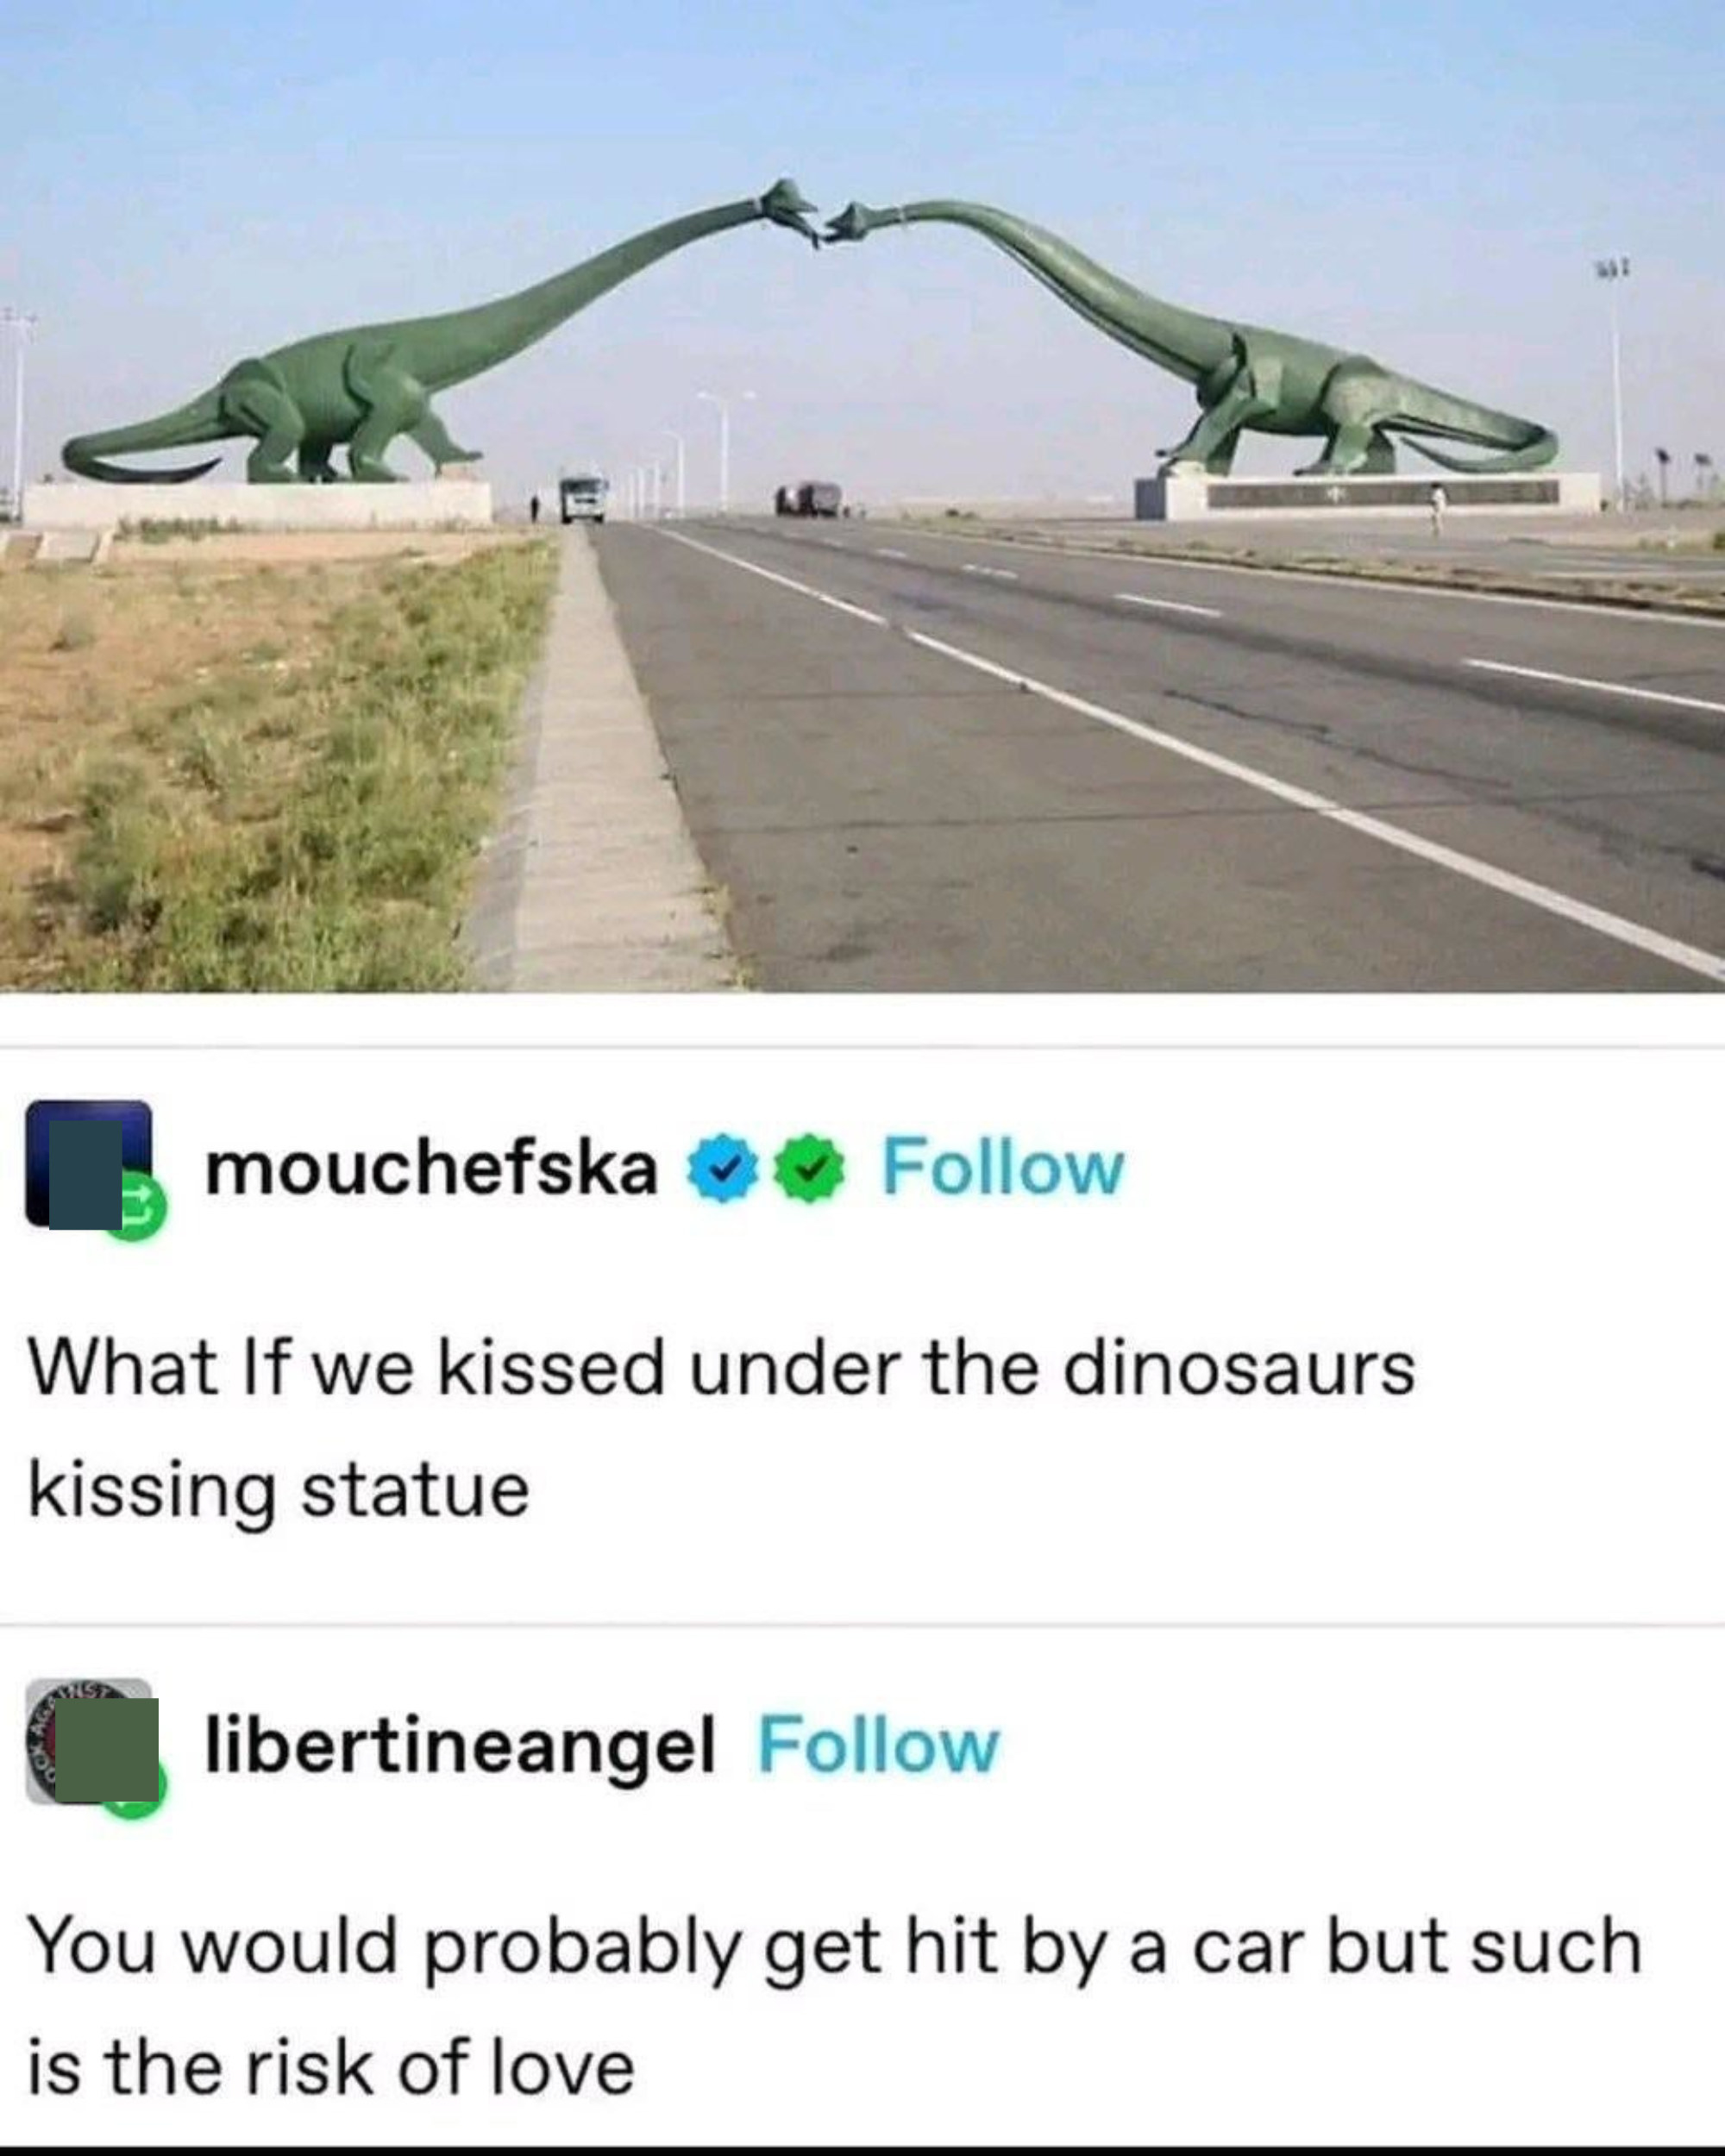 &quot;What if we kissed under the dinosaurs kissing statue&quot;